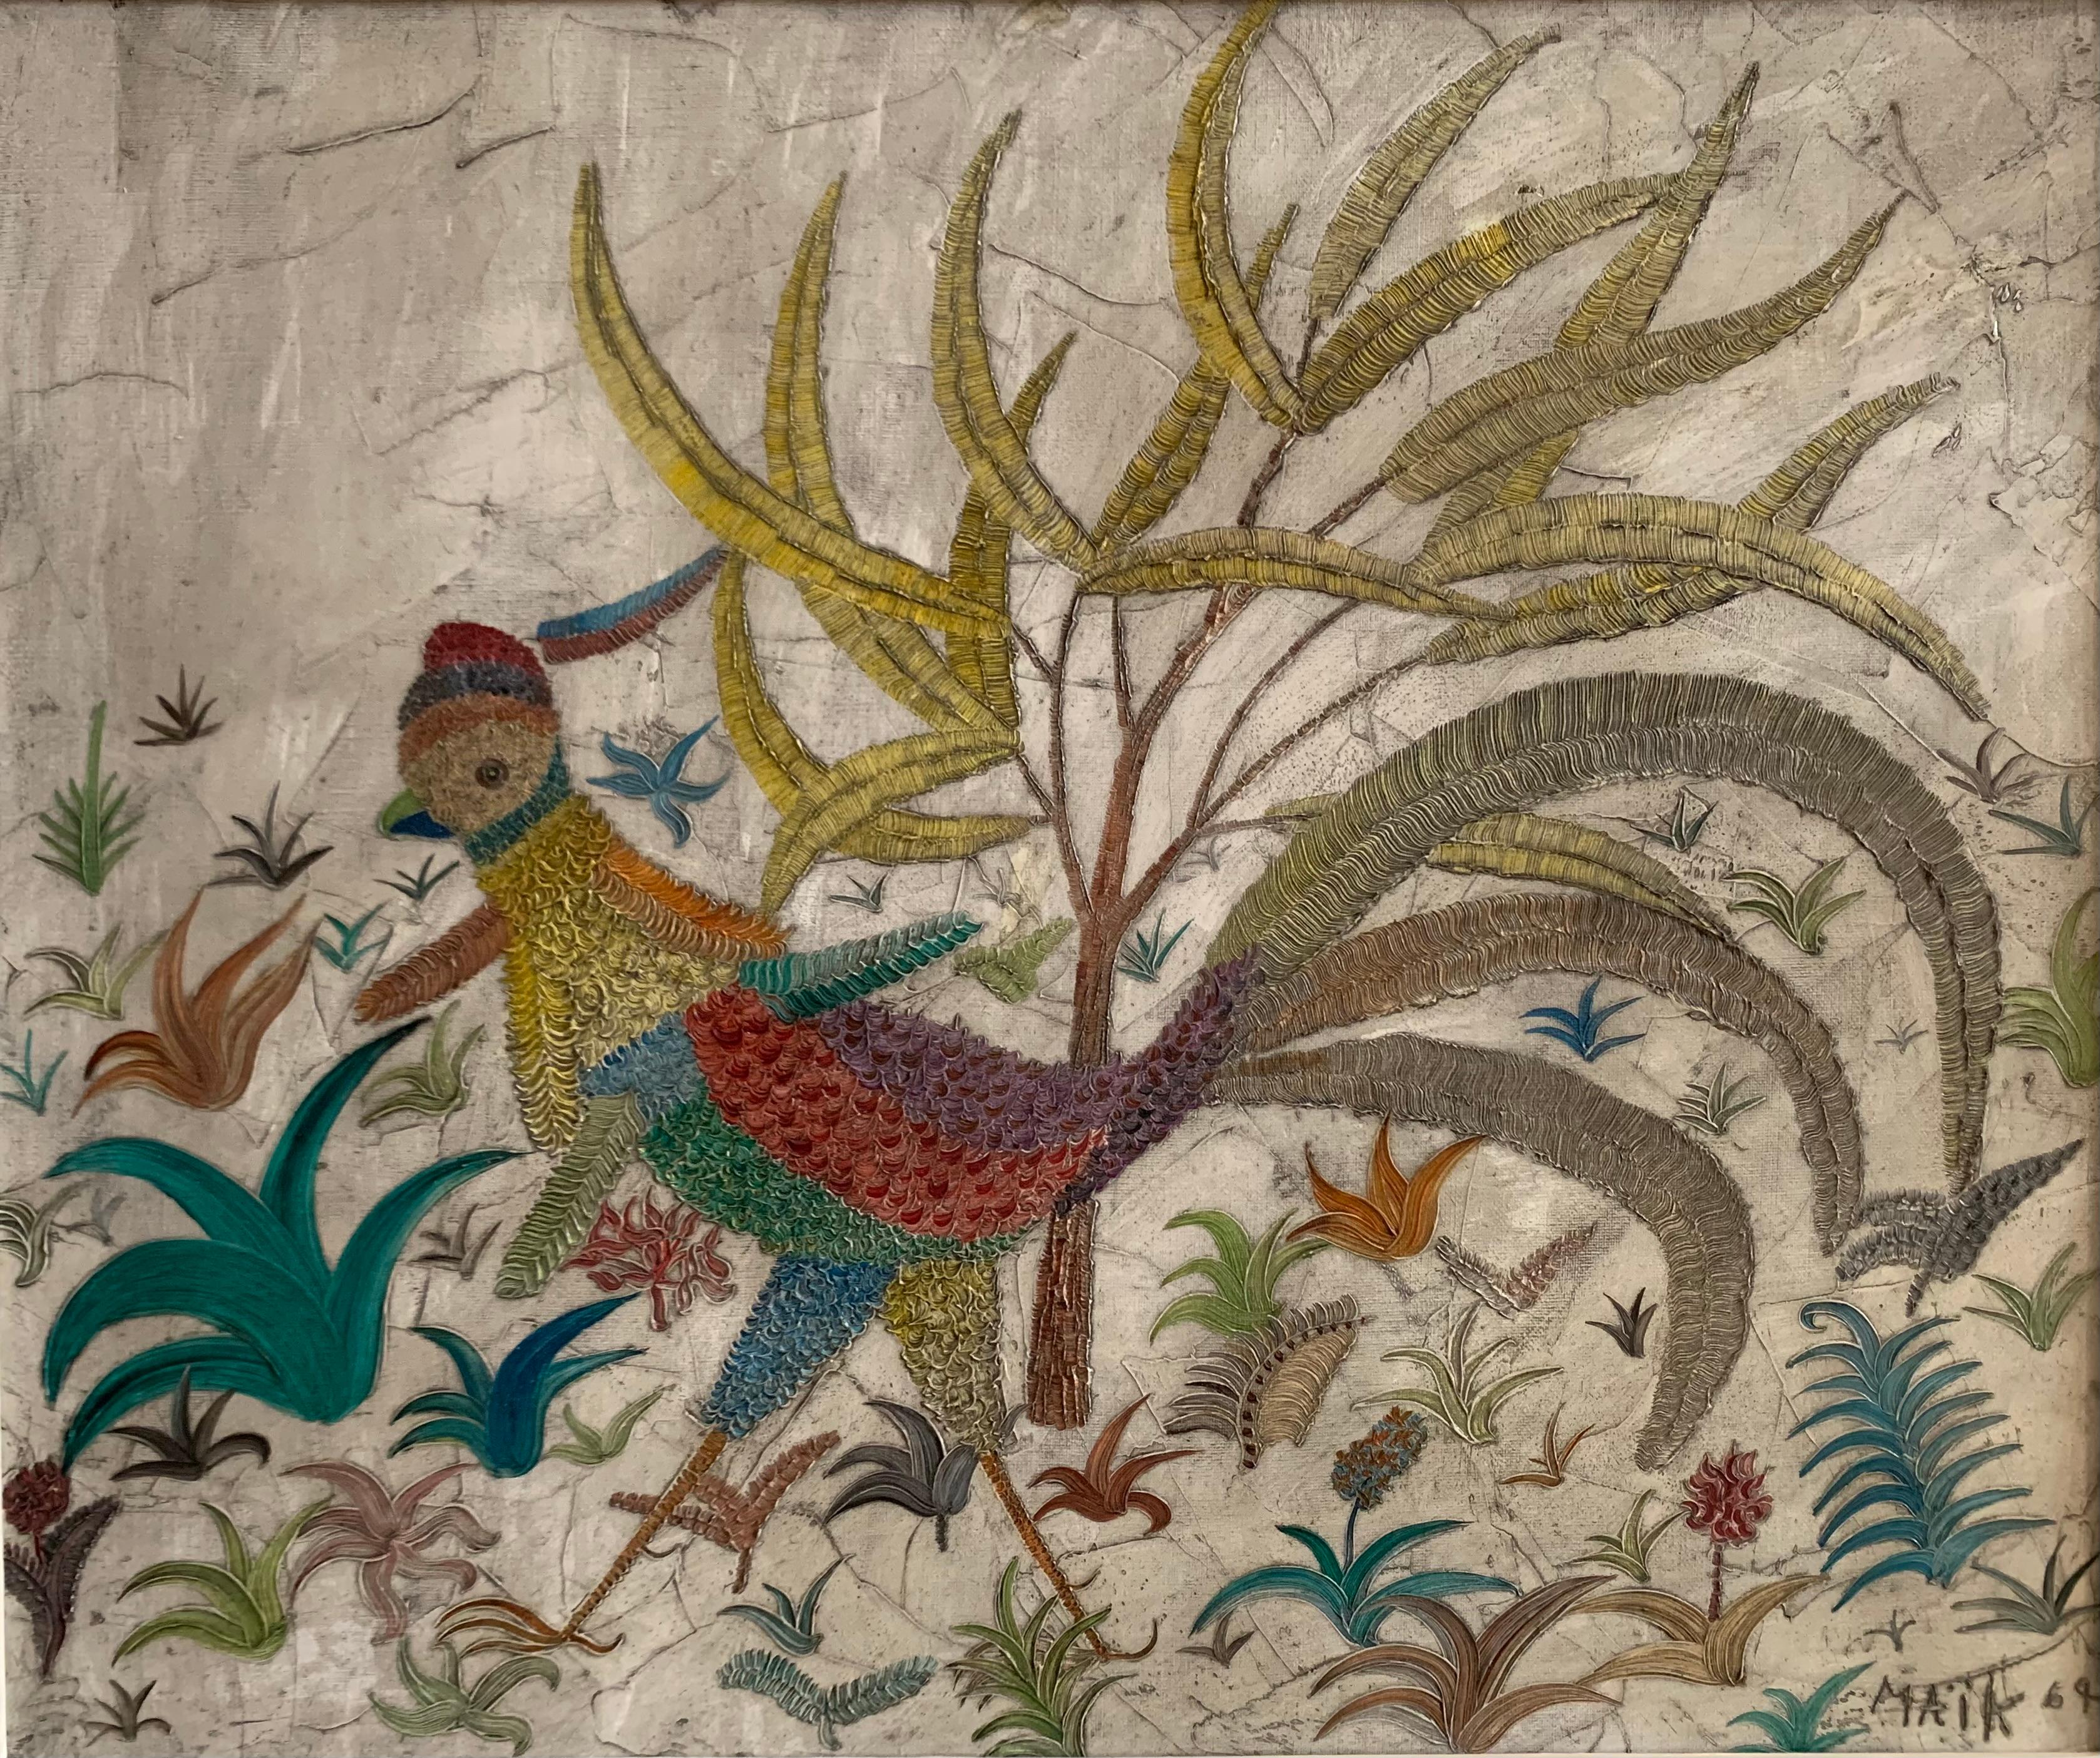 Oil on canvas 
by Henri Hecht MAÏK (1922-1993).
“Bird of paradise”.
sign and date lower right “MAÏK 64”.
Framed with a carve and paint French “Montparnasse” frame, circa 1950.
Canvas dimensions: 45 x 54 cm.
Overall dimensions: 65 x 74 cm.



